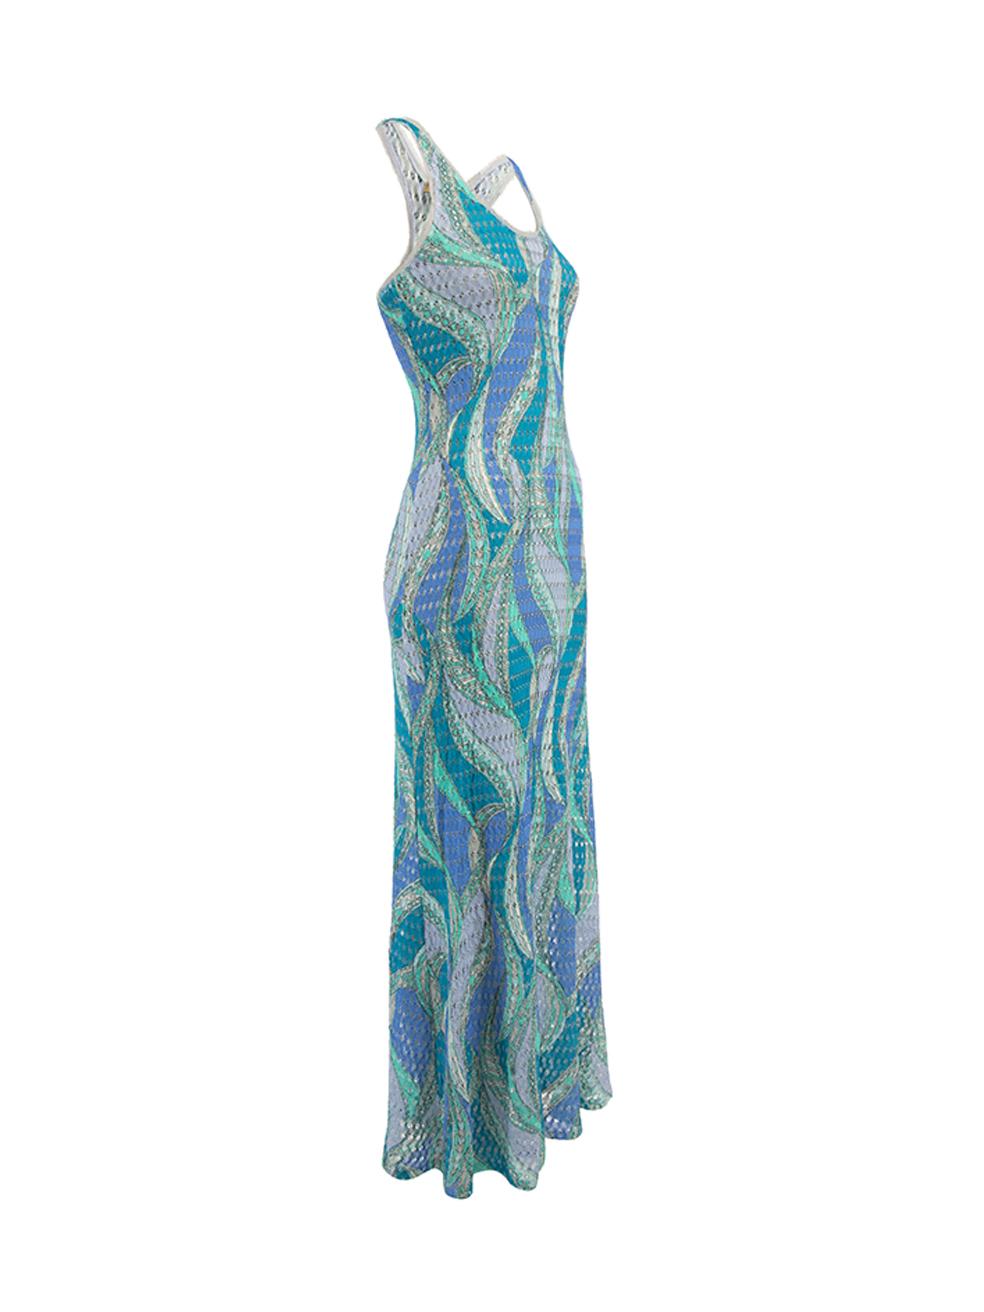 CONDITION is Very good. Hardly any visible wear to dress is evident on this used Emillio Pucci designer resale item. Details Blue tone and turquoise Synthetic Maxi dress Abstract and hollow holes pattern Scoop front neckline T back neckline